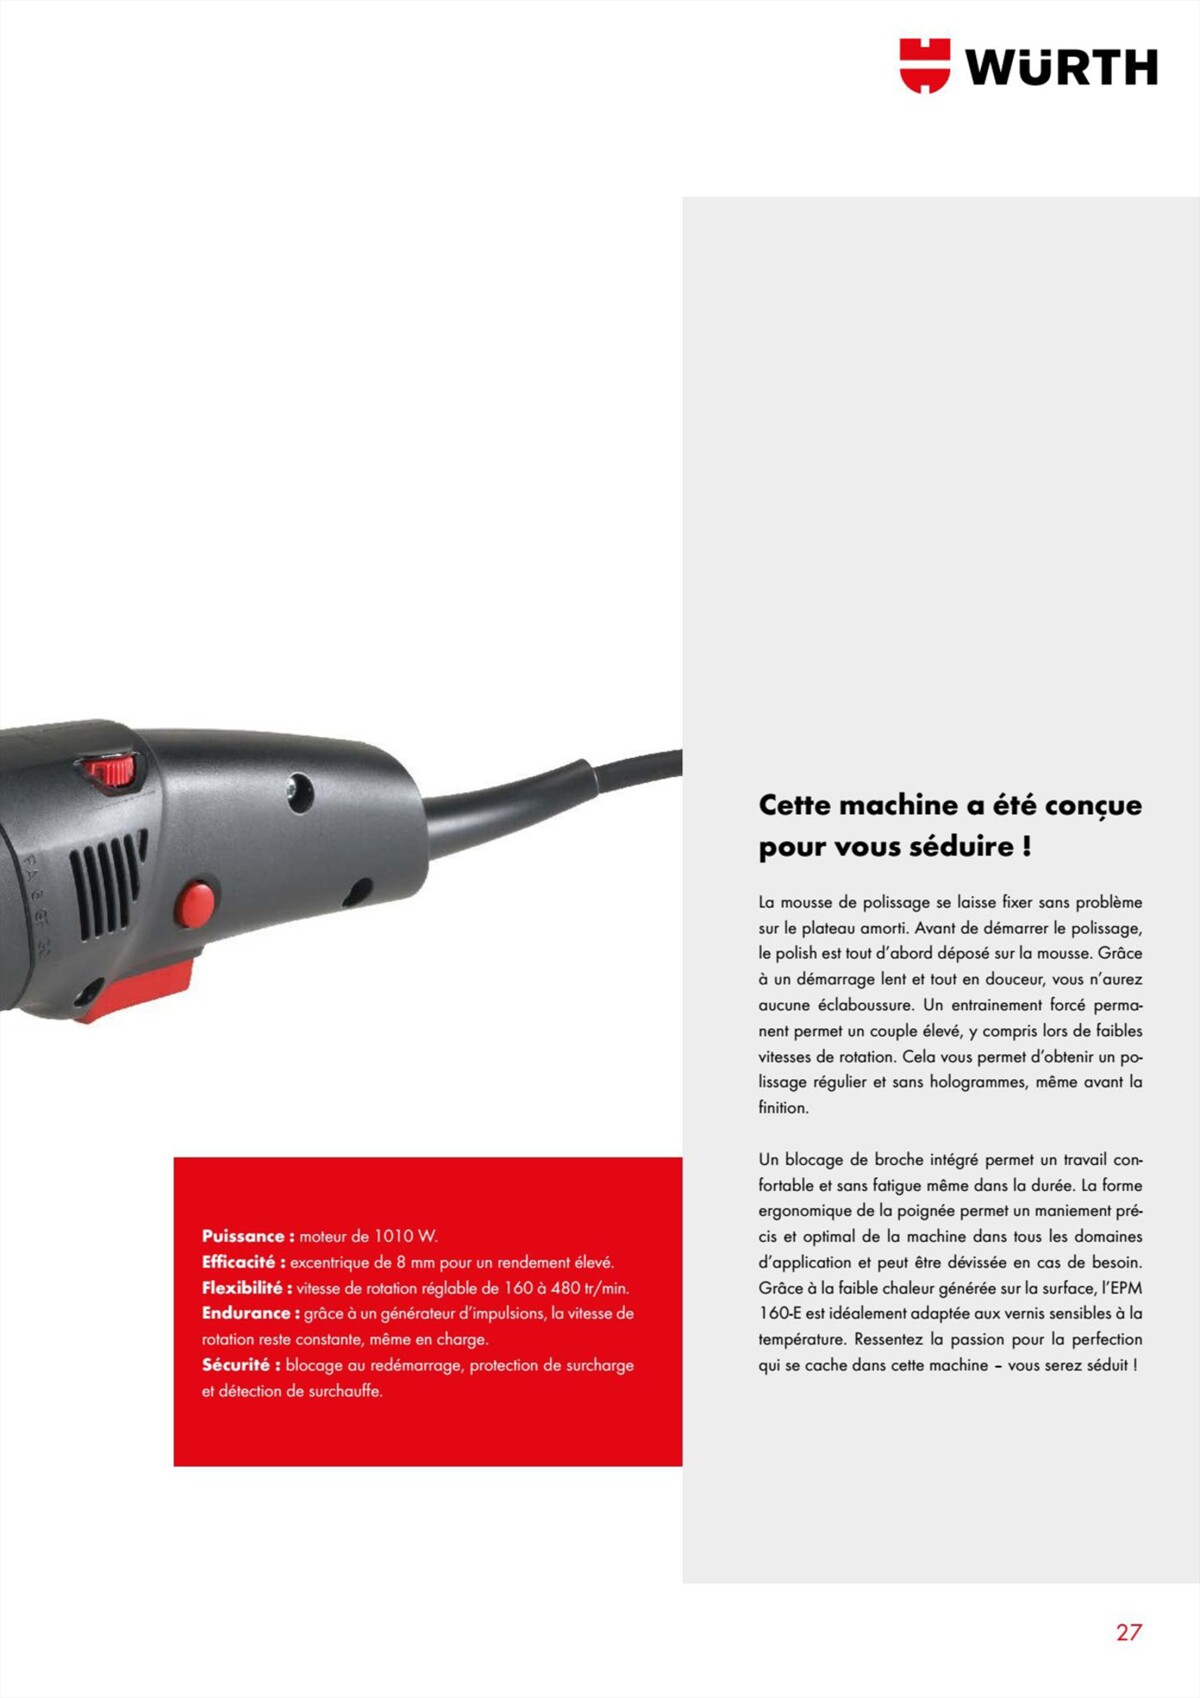 Catalogue Würth - Perfect Care, page 00027